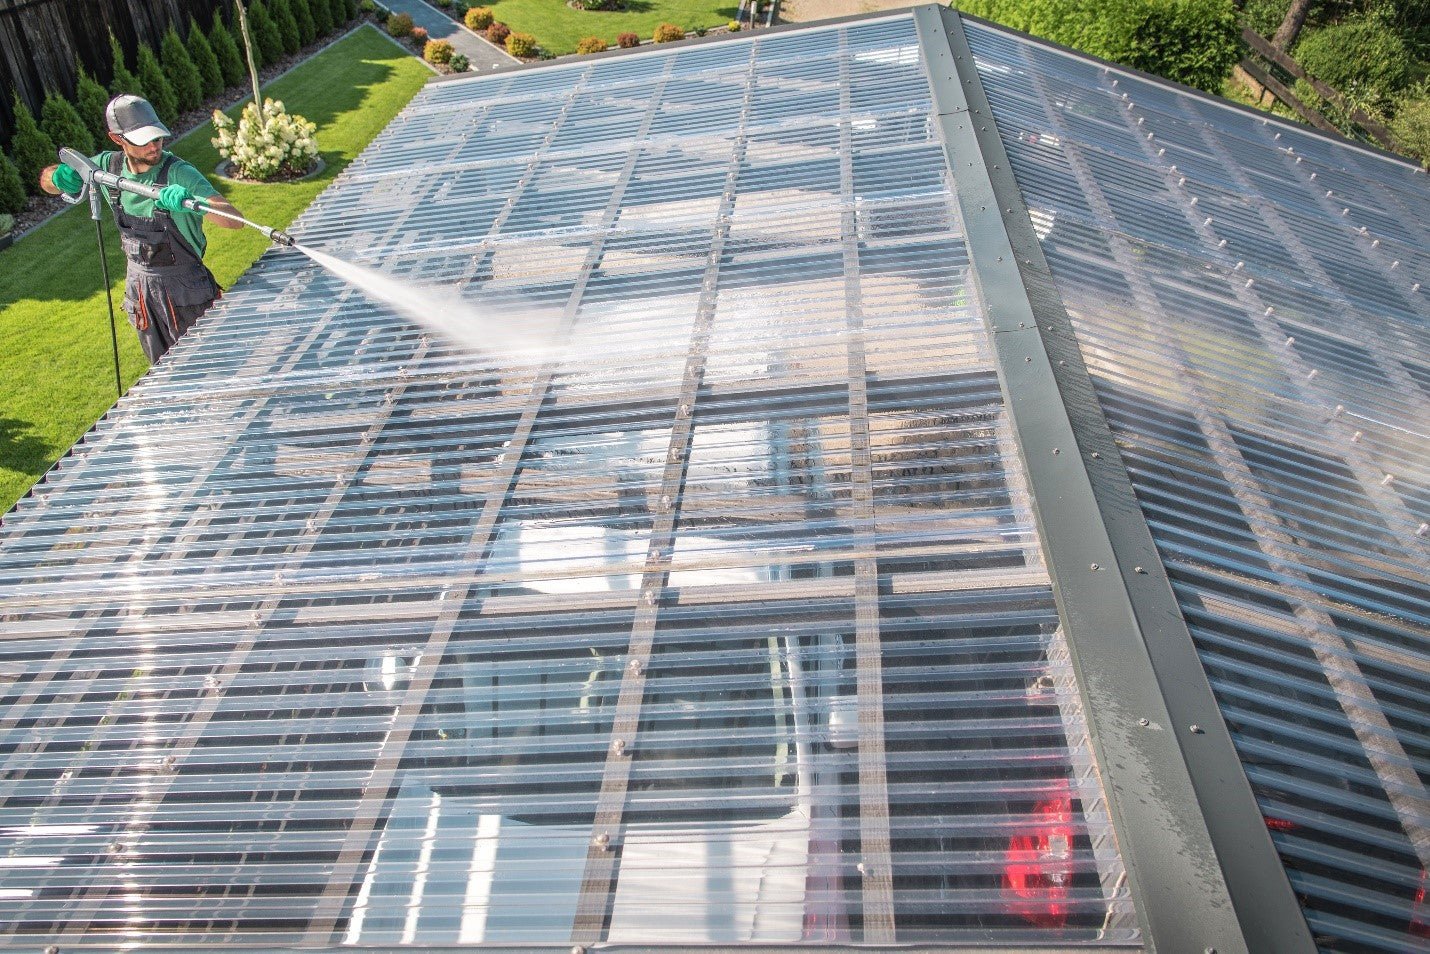 The Beginner's Guide to Polycarbonate Roofing - ExcelitePlas